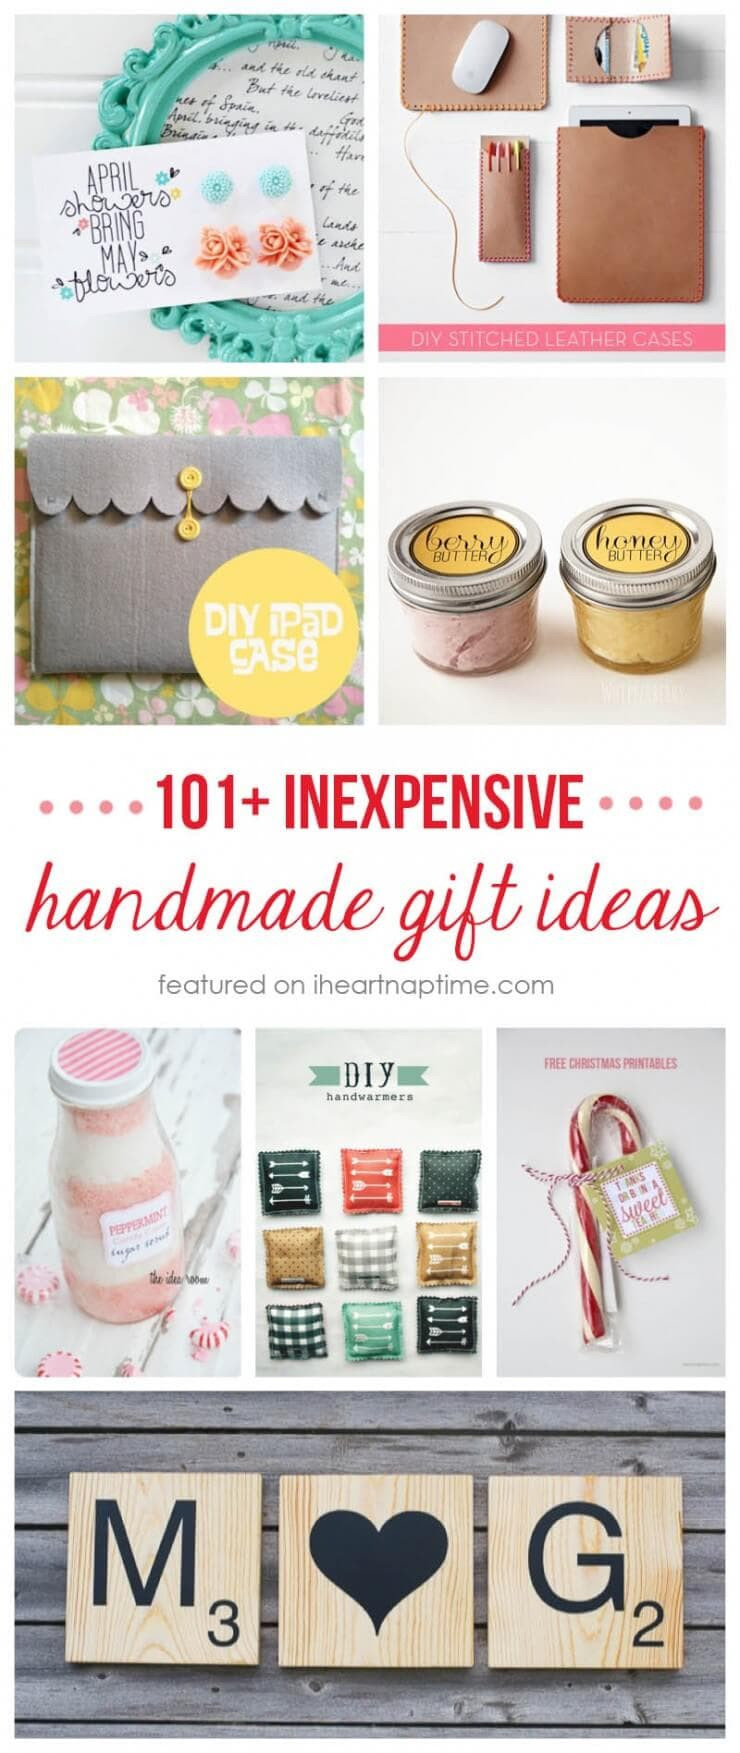 Easy Holiday Gift Ideas
 50 homemade t ideas to make for under $5 I Heart Nap Time